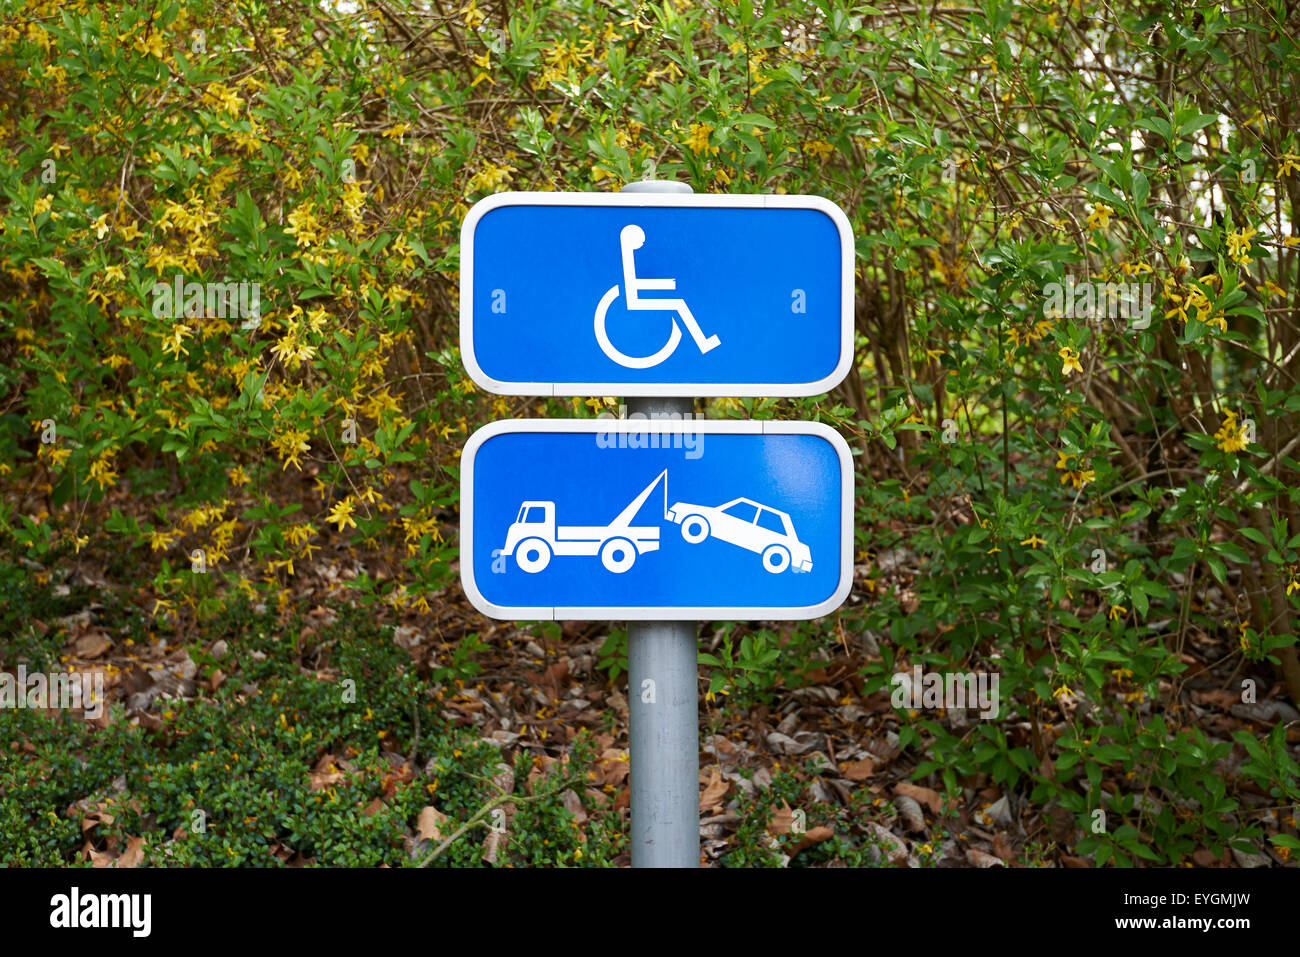 A handicap parking sign and car removal sign on green background Stock Photo